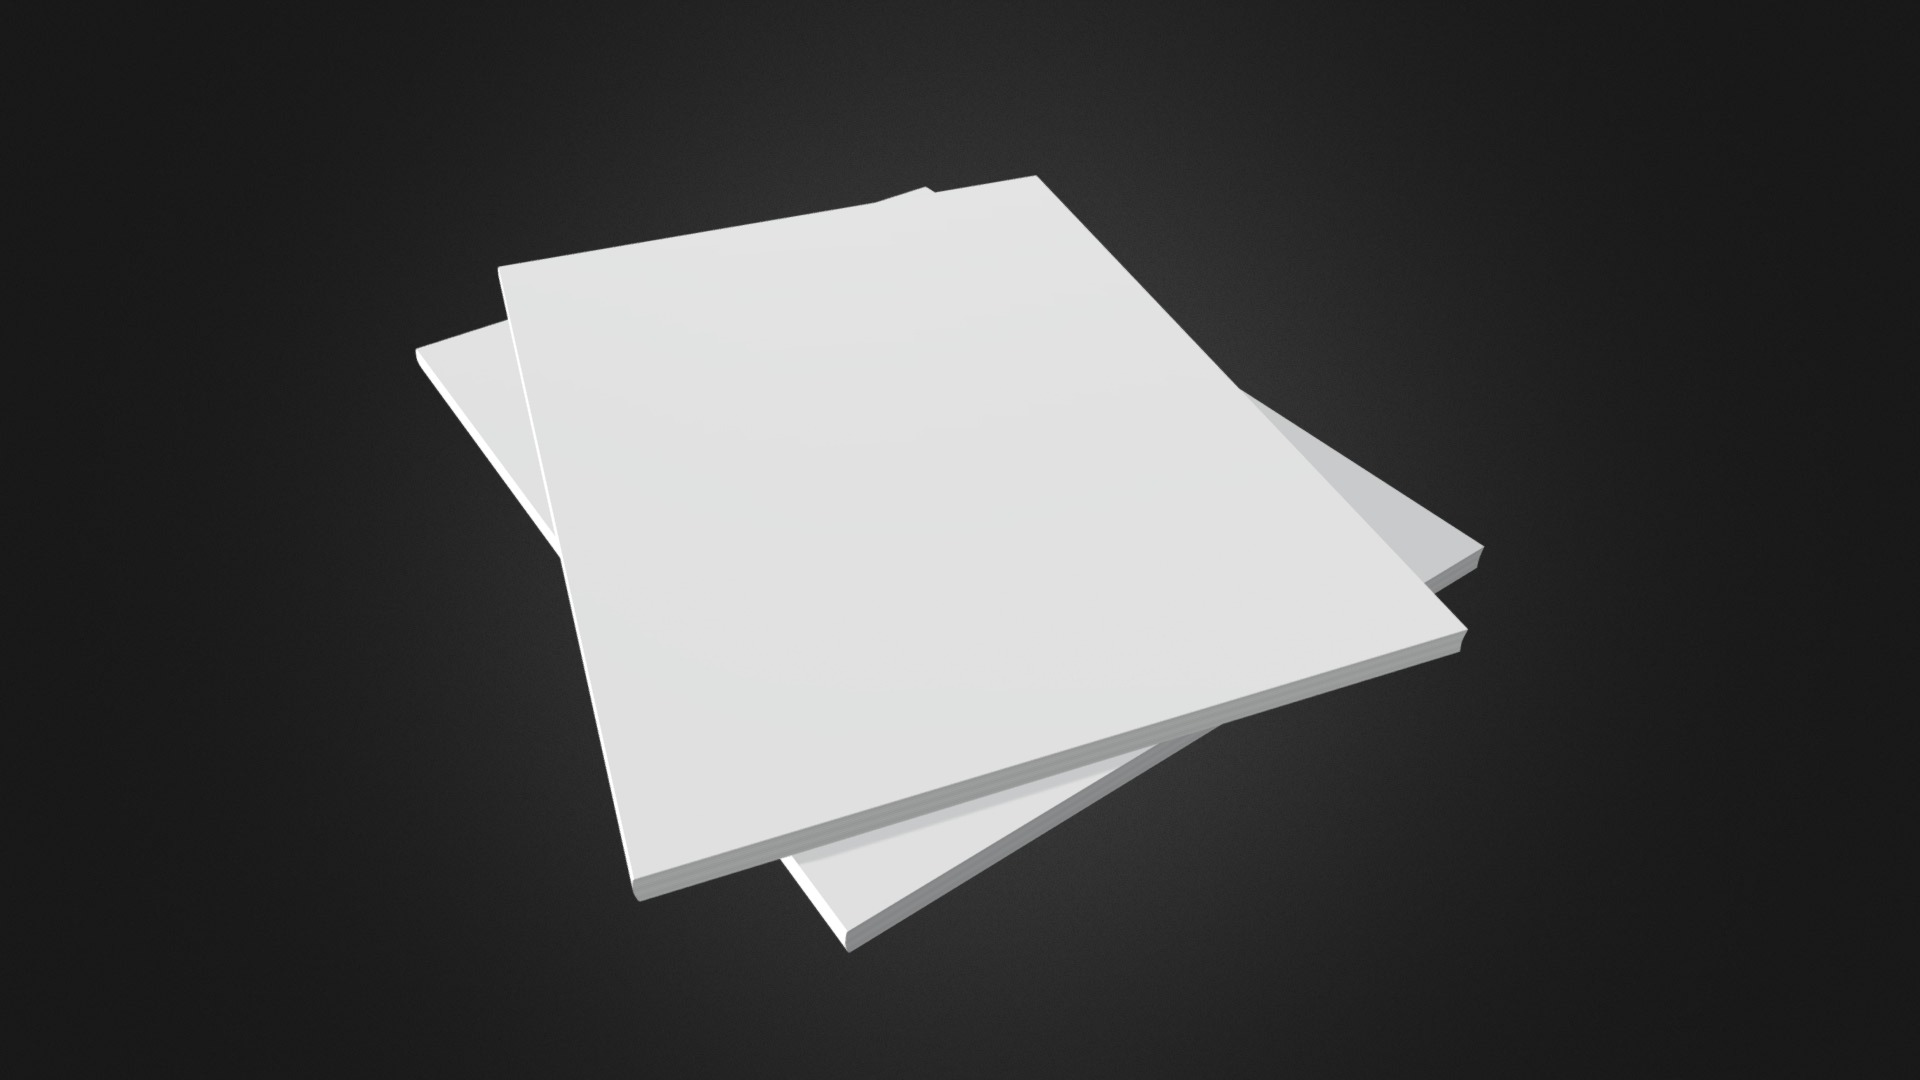 3D model magazine closed - This is a 3D model of the magazine closed. The 3D model is about a white paper with a black background.